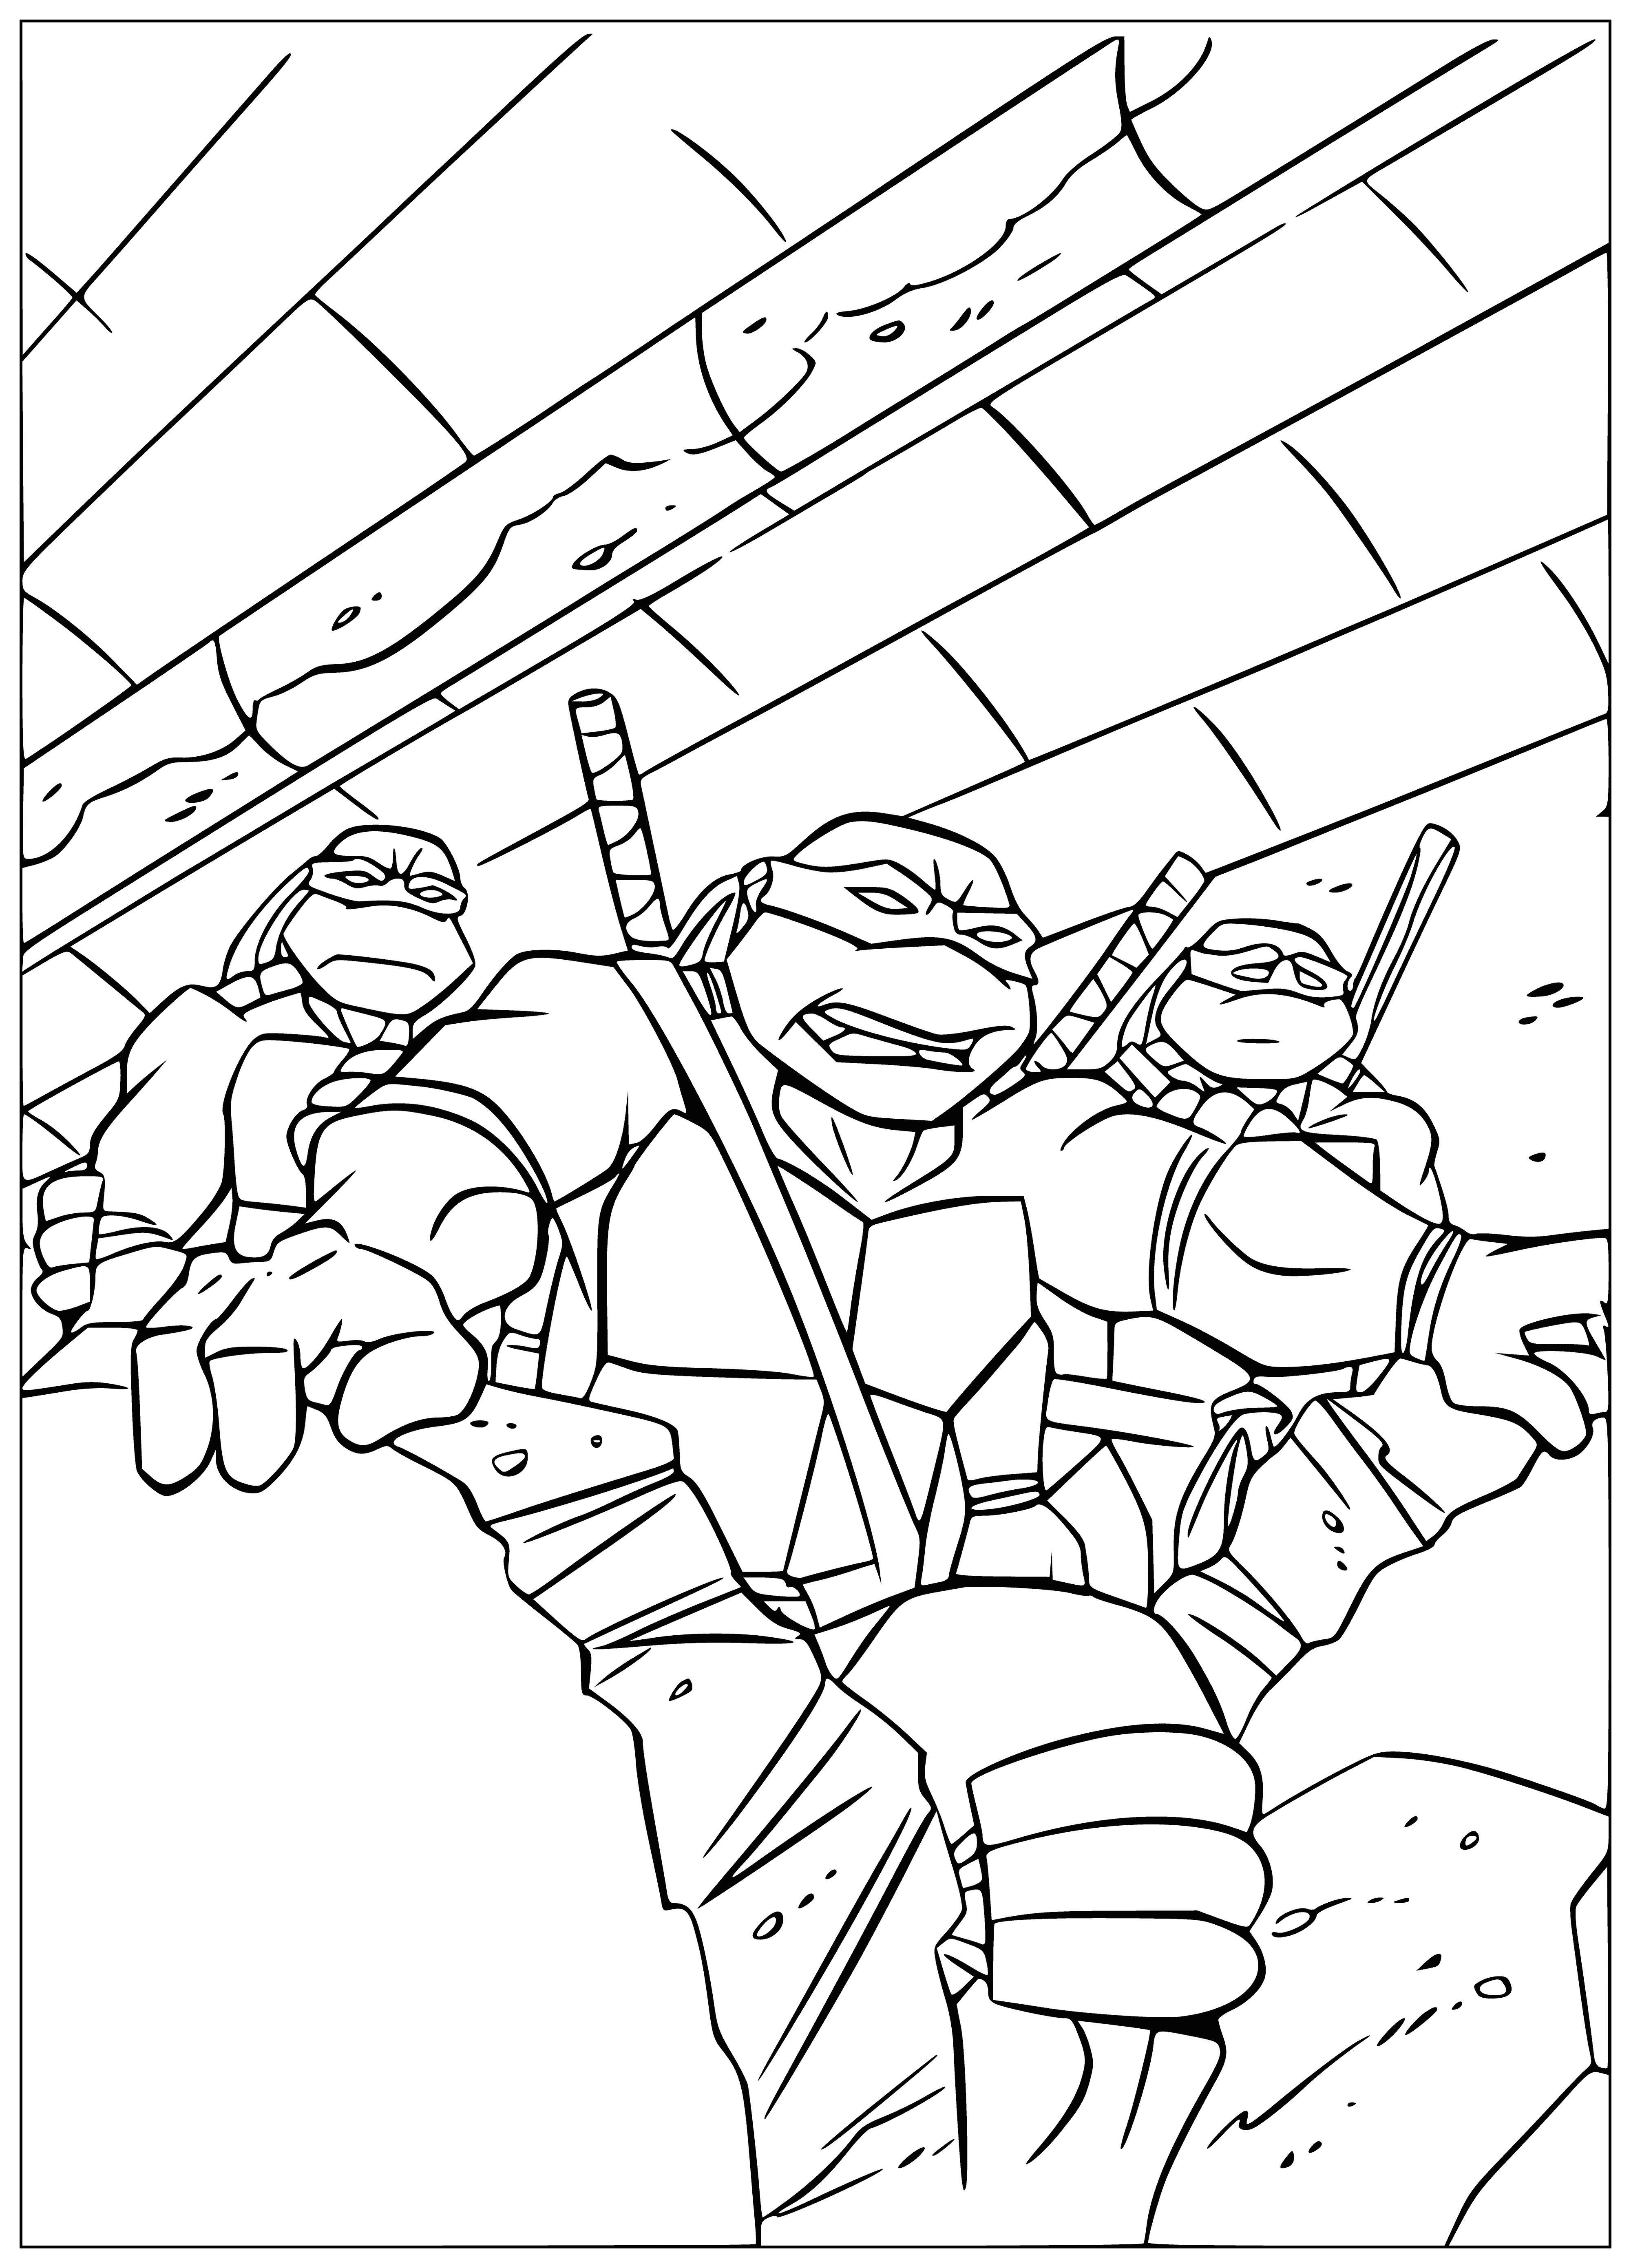 coloring page: 4 turtles: 2 green, 1 red, 1 orange, each have a diff weapon- swords, staff, nunchucks, & bow & arrow. They stand on pipe & there's a rat in bg.